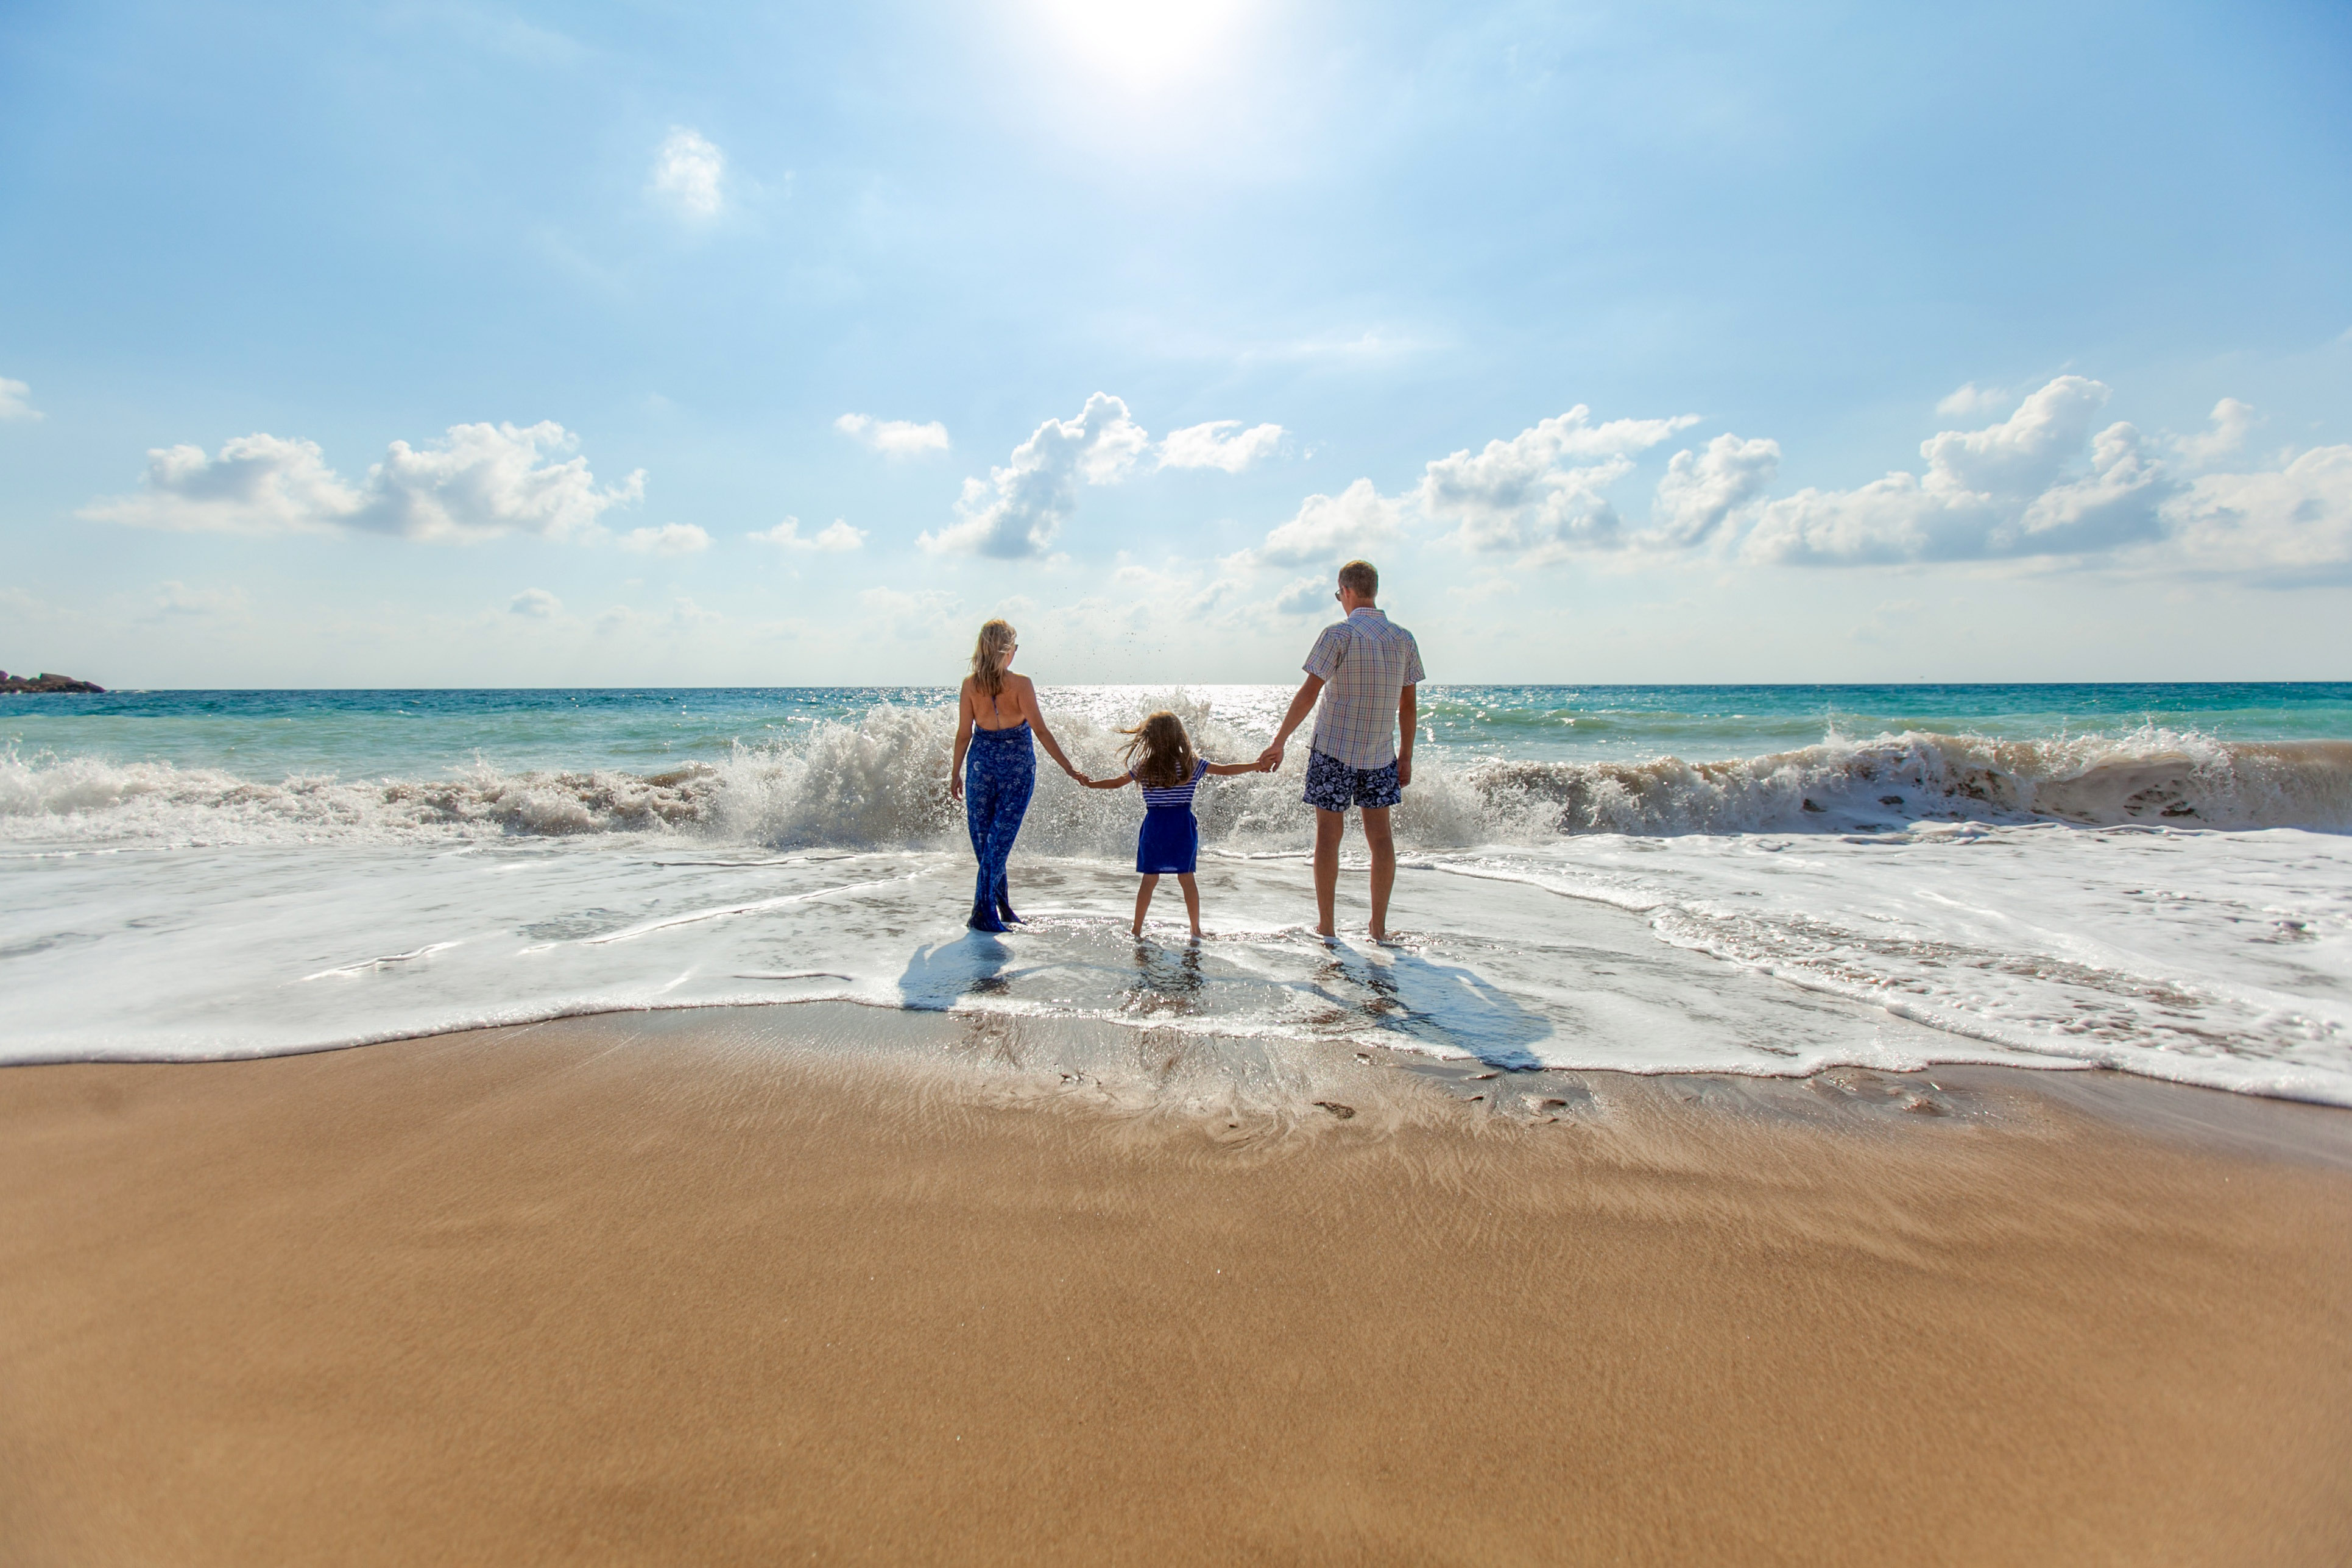 Family on the Beach in Paphos, Cyprus image - Free stock photo ...